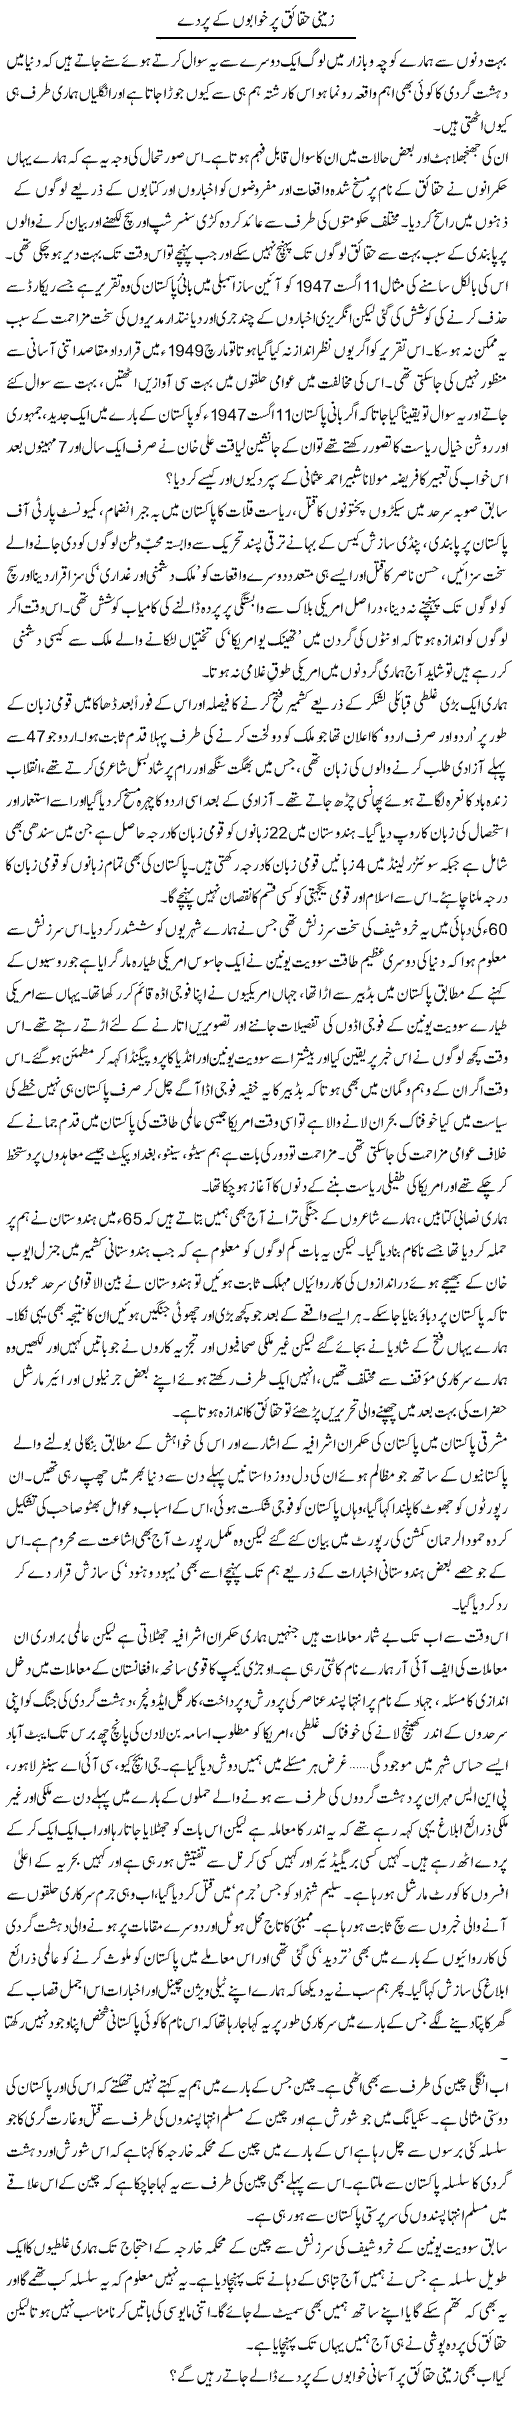 Allegations on Us Express Column Zahinda Hina 7 August 2011